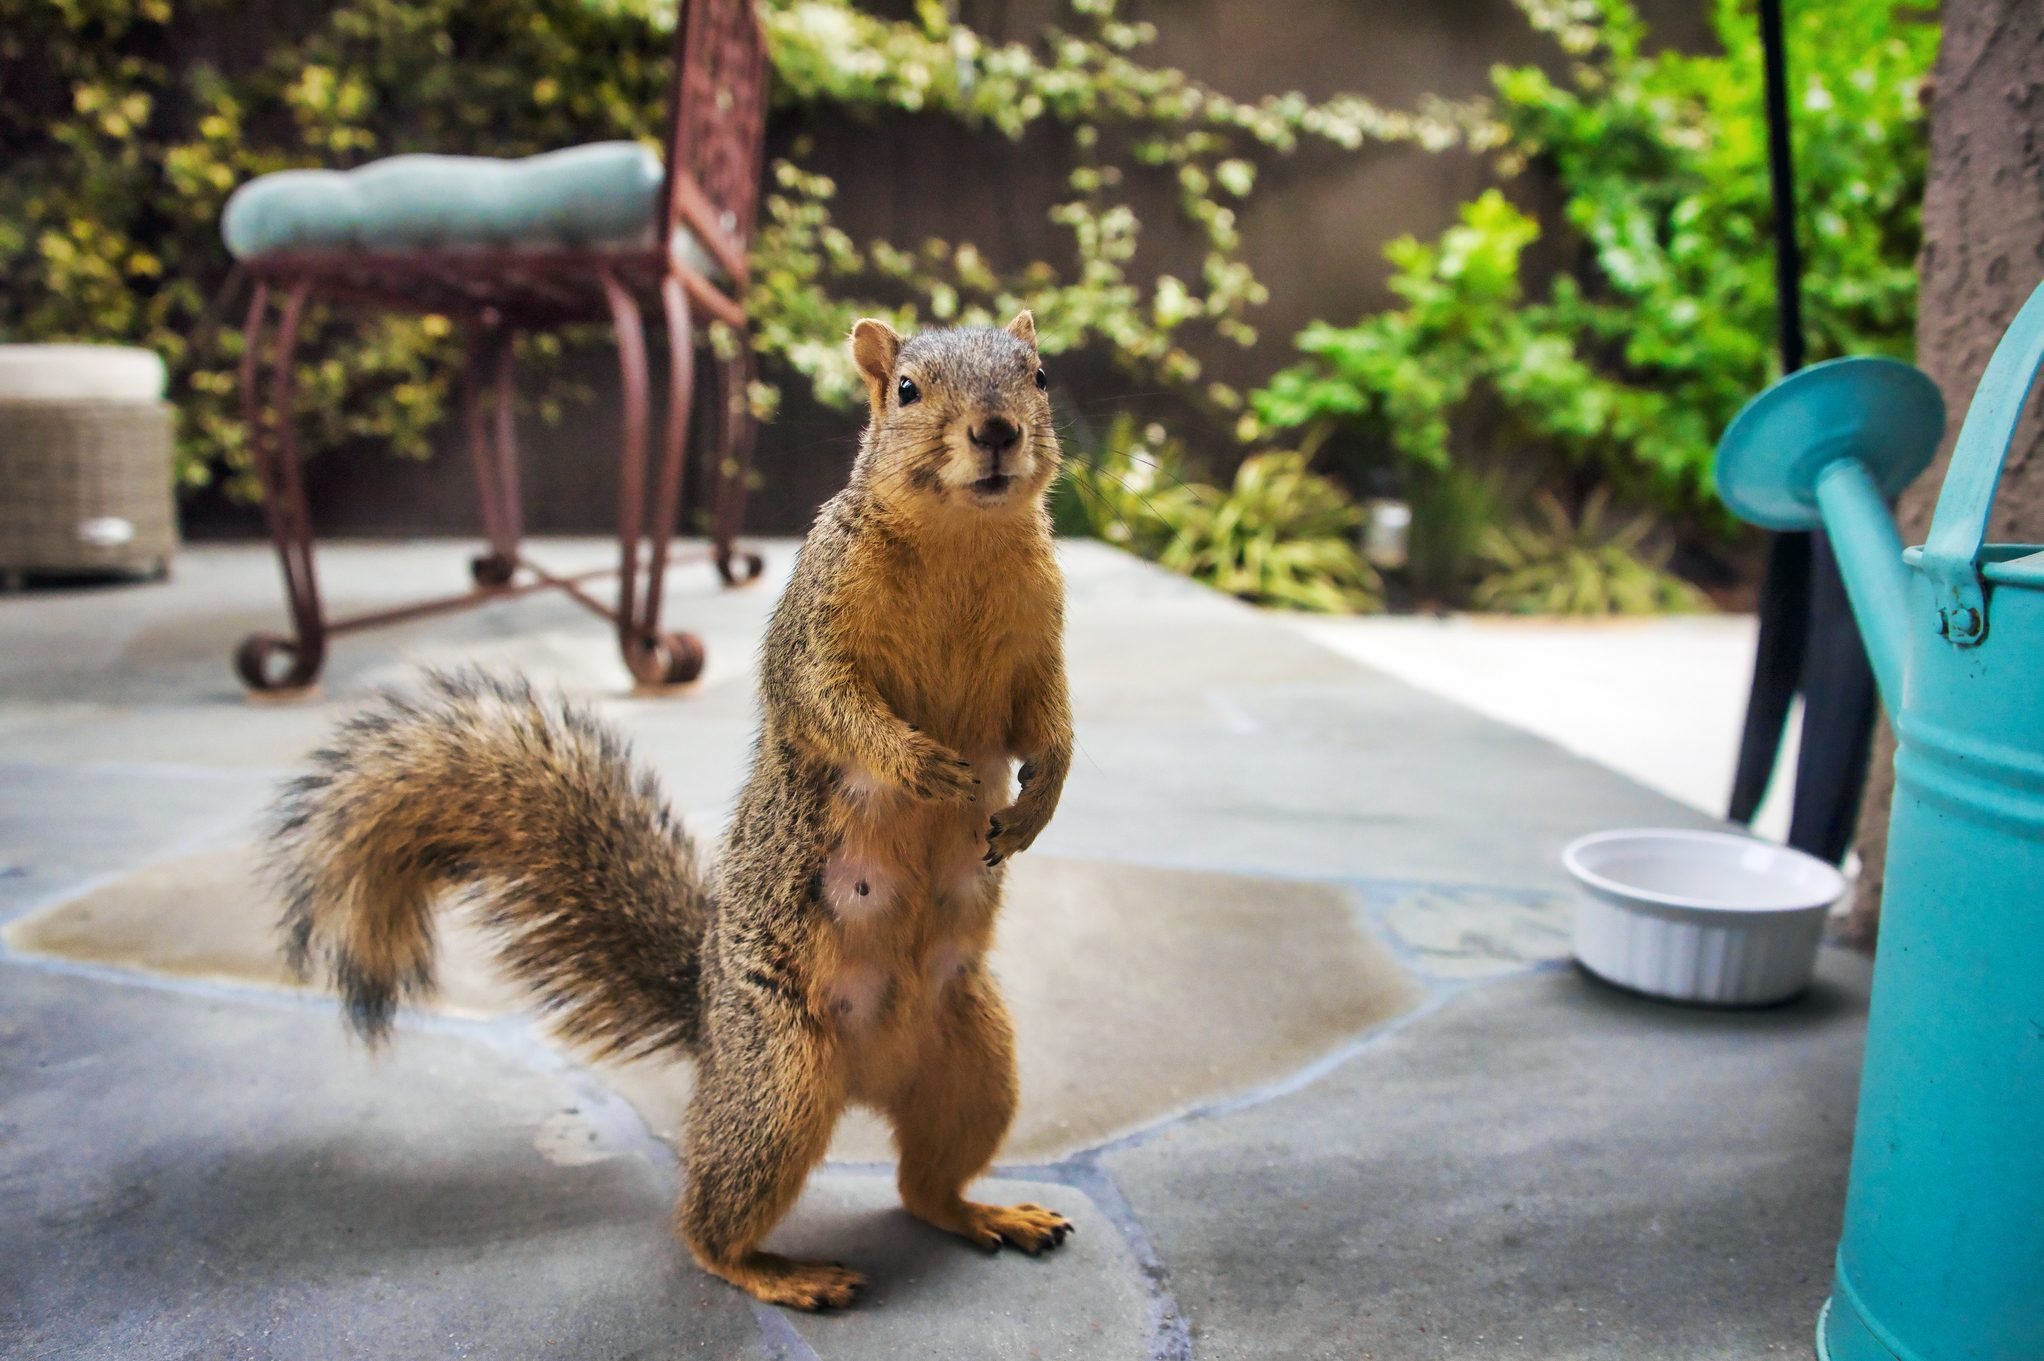 8 Ways To Keep Squirrels Out of Your Yard